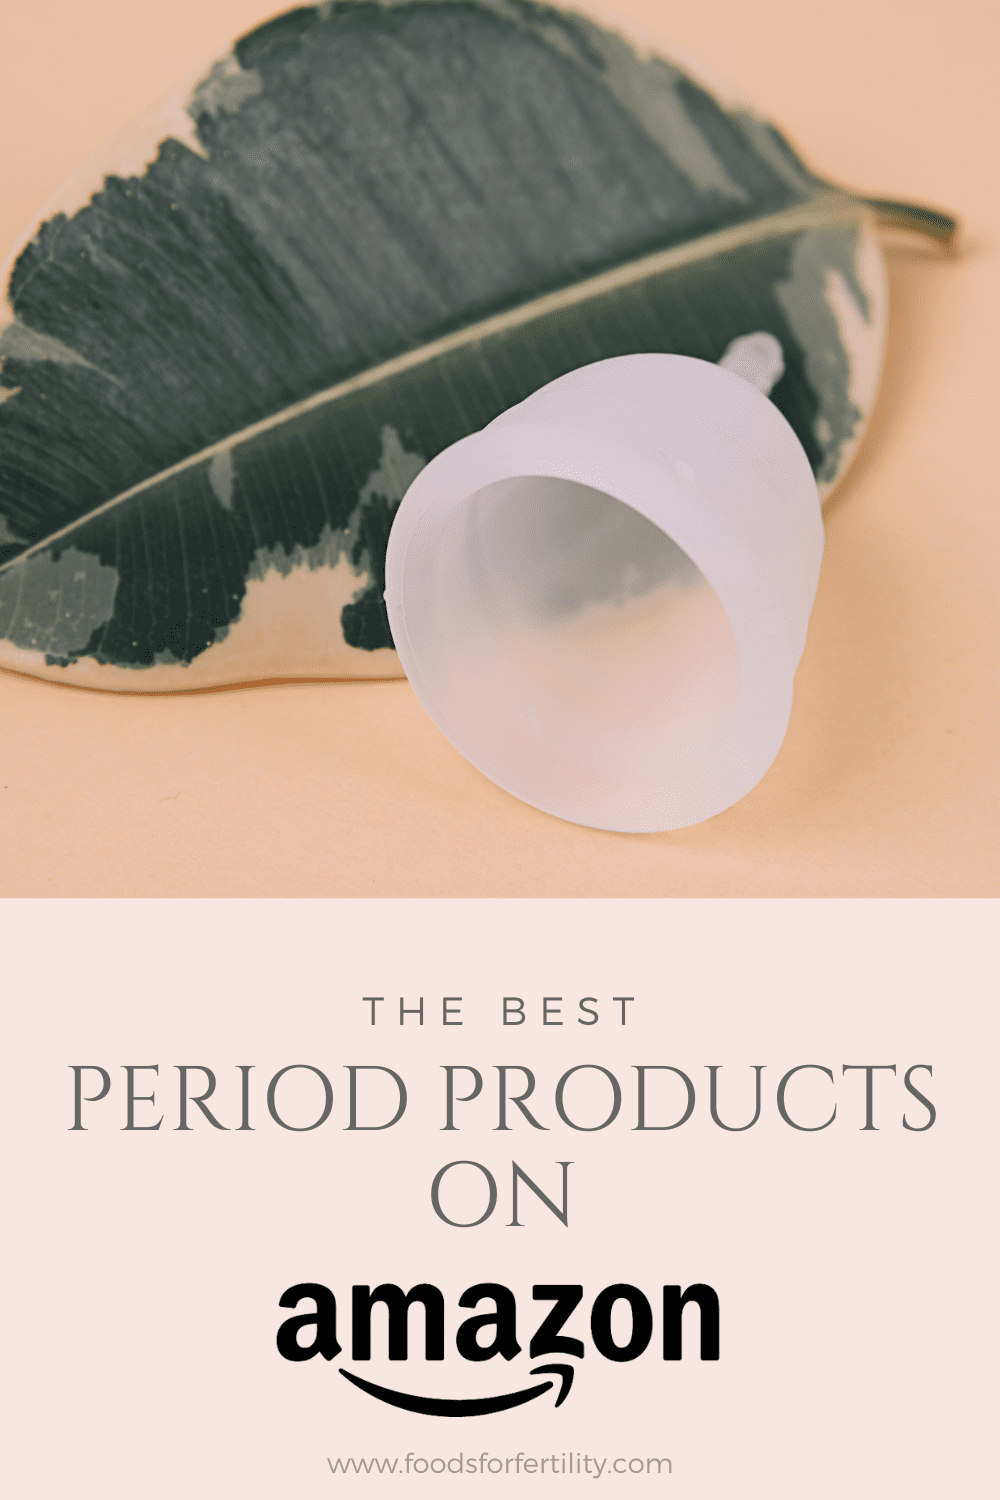 The Best Period Cups, Menstrual Products and PMS Treatments on Amazon